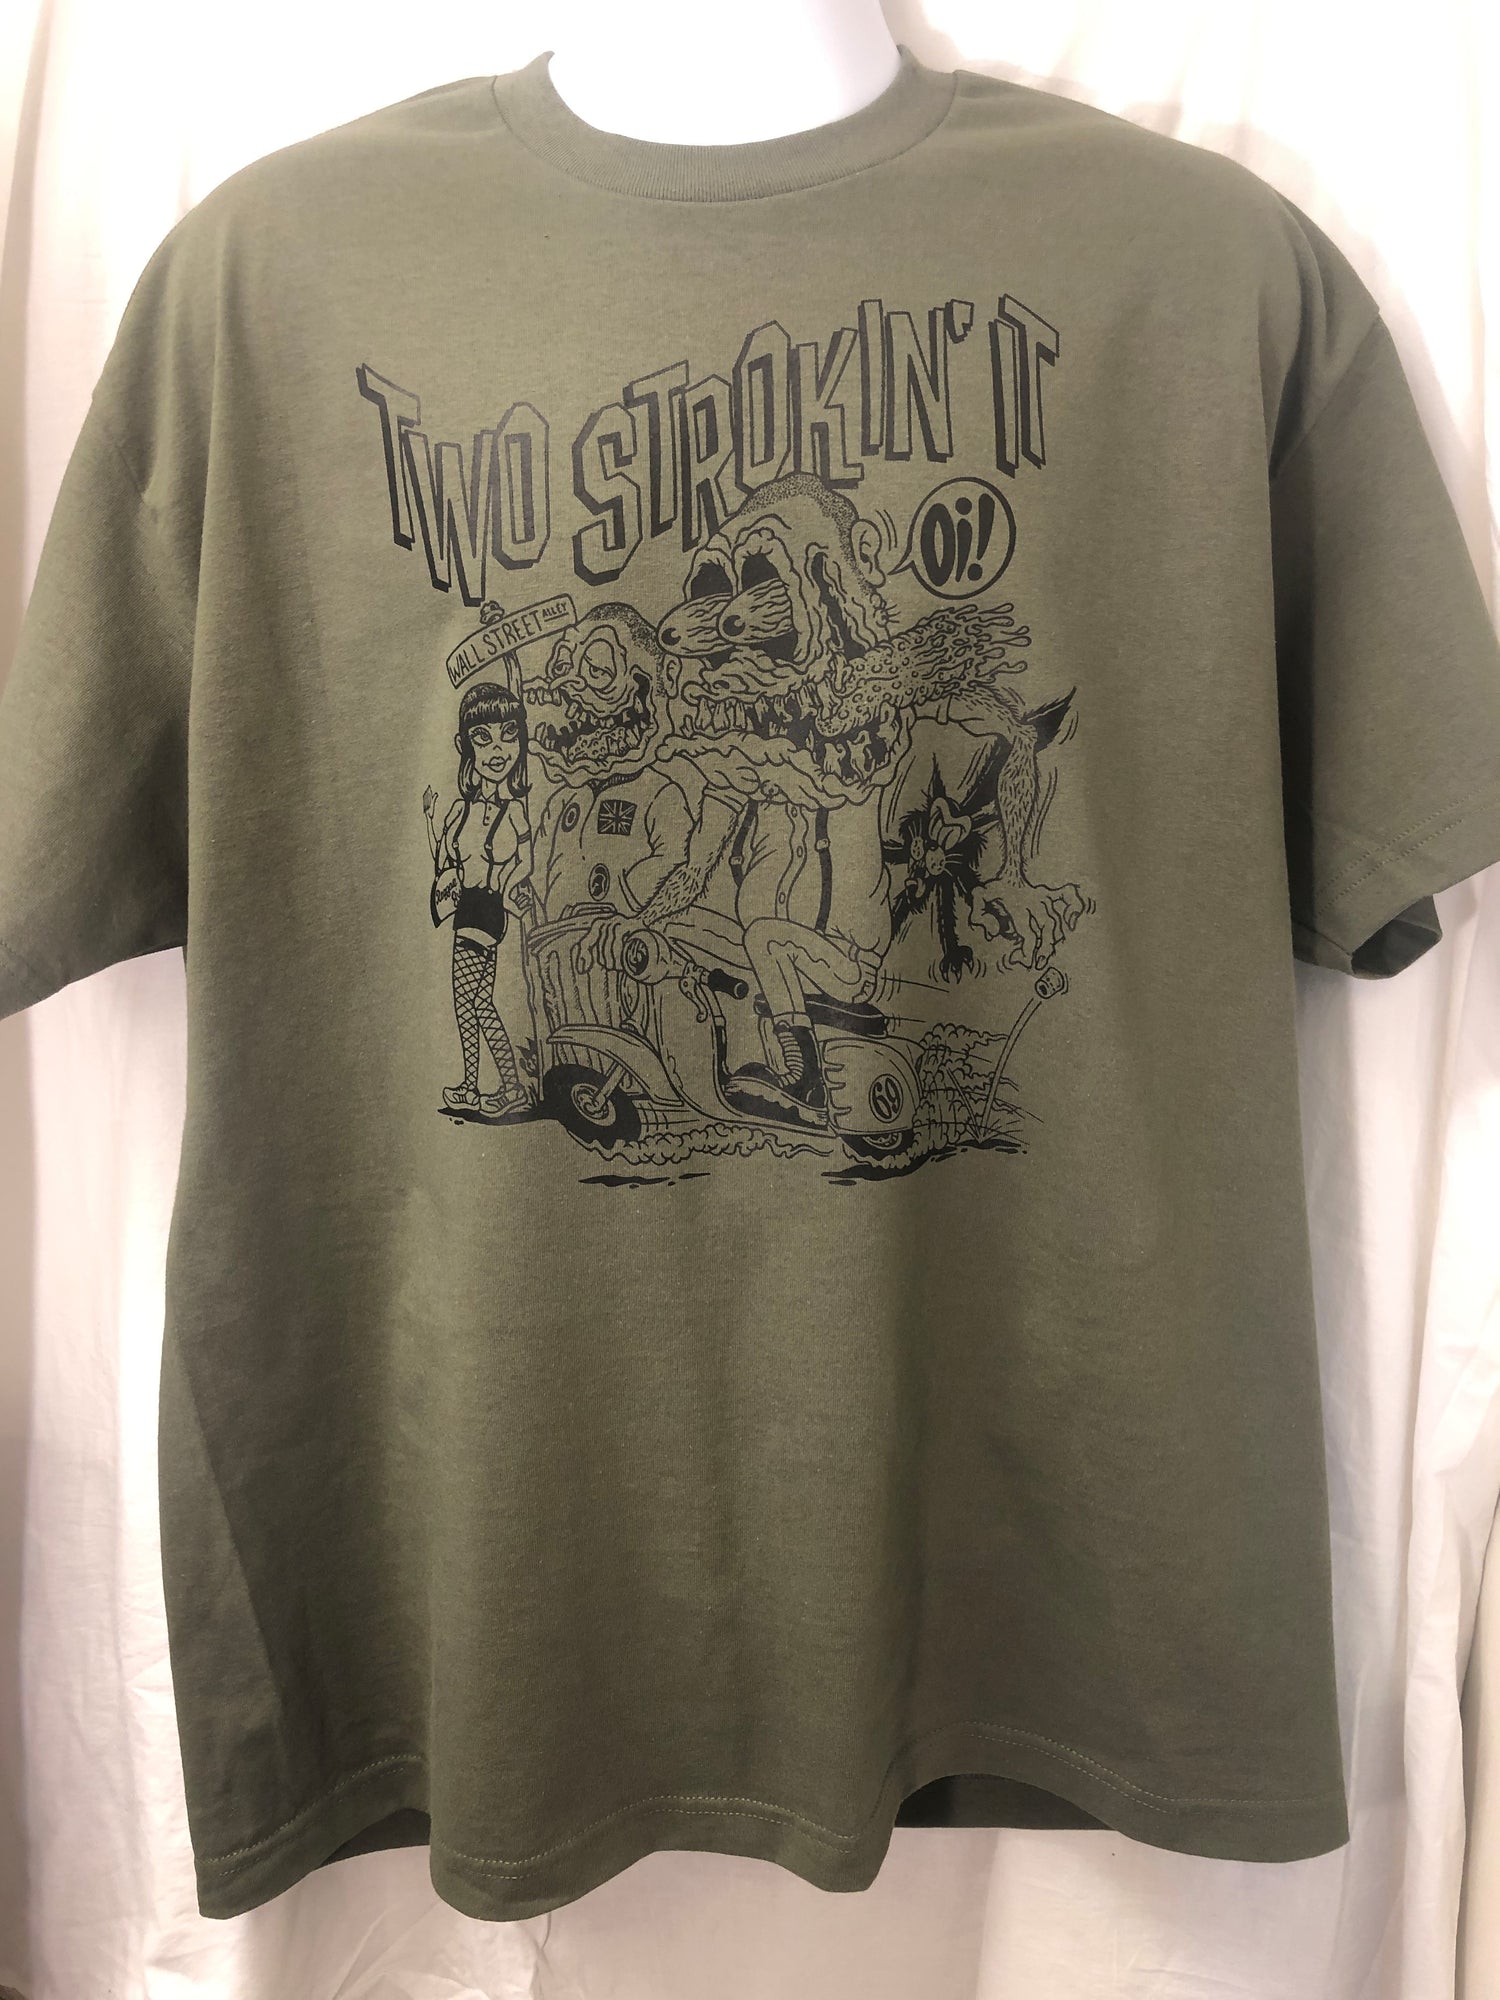 Skinhead Girl Scooter Oi Way of Life T-shirt